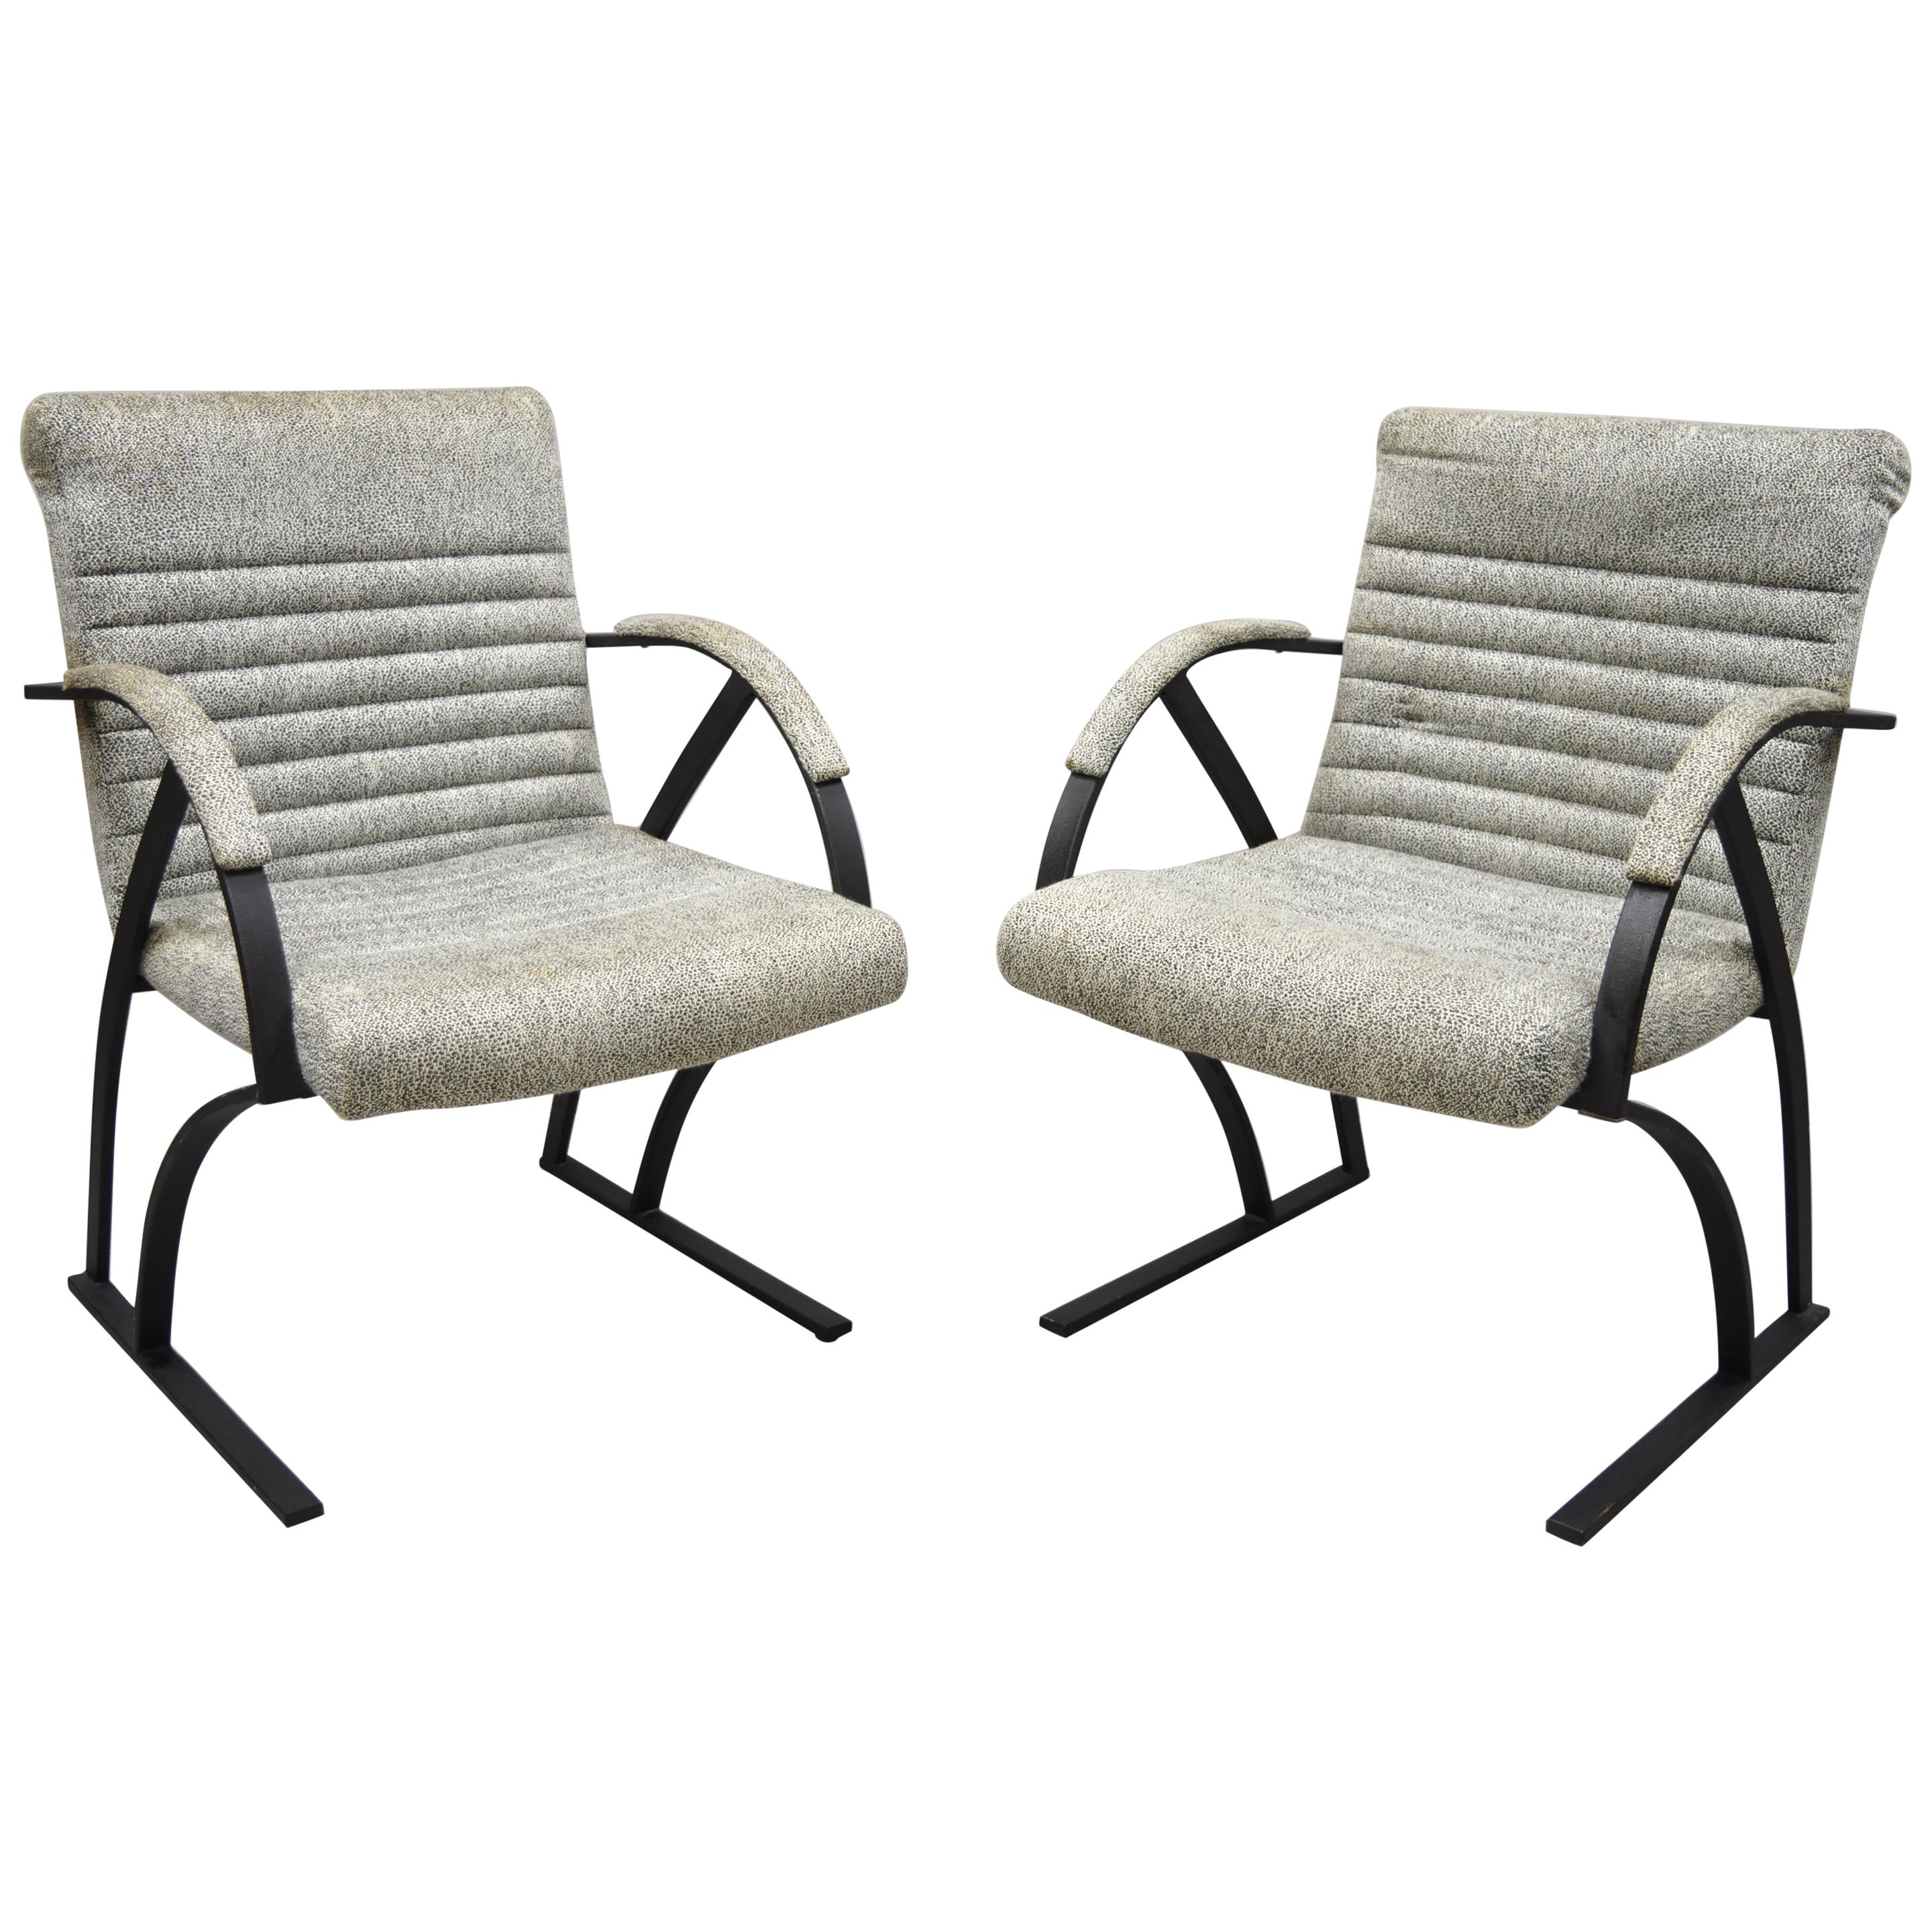 Midcentury Cal Style Furniture Art Deco Metal Frame Lounge Armchairs A, Pair For Sale